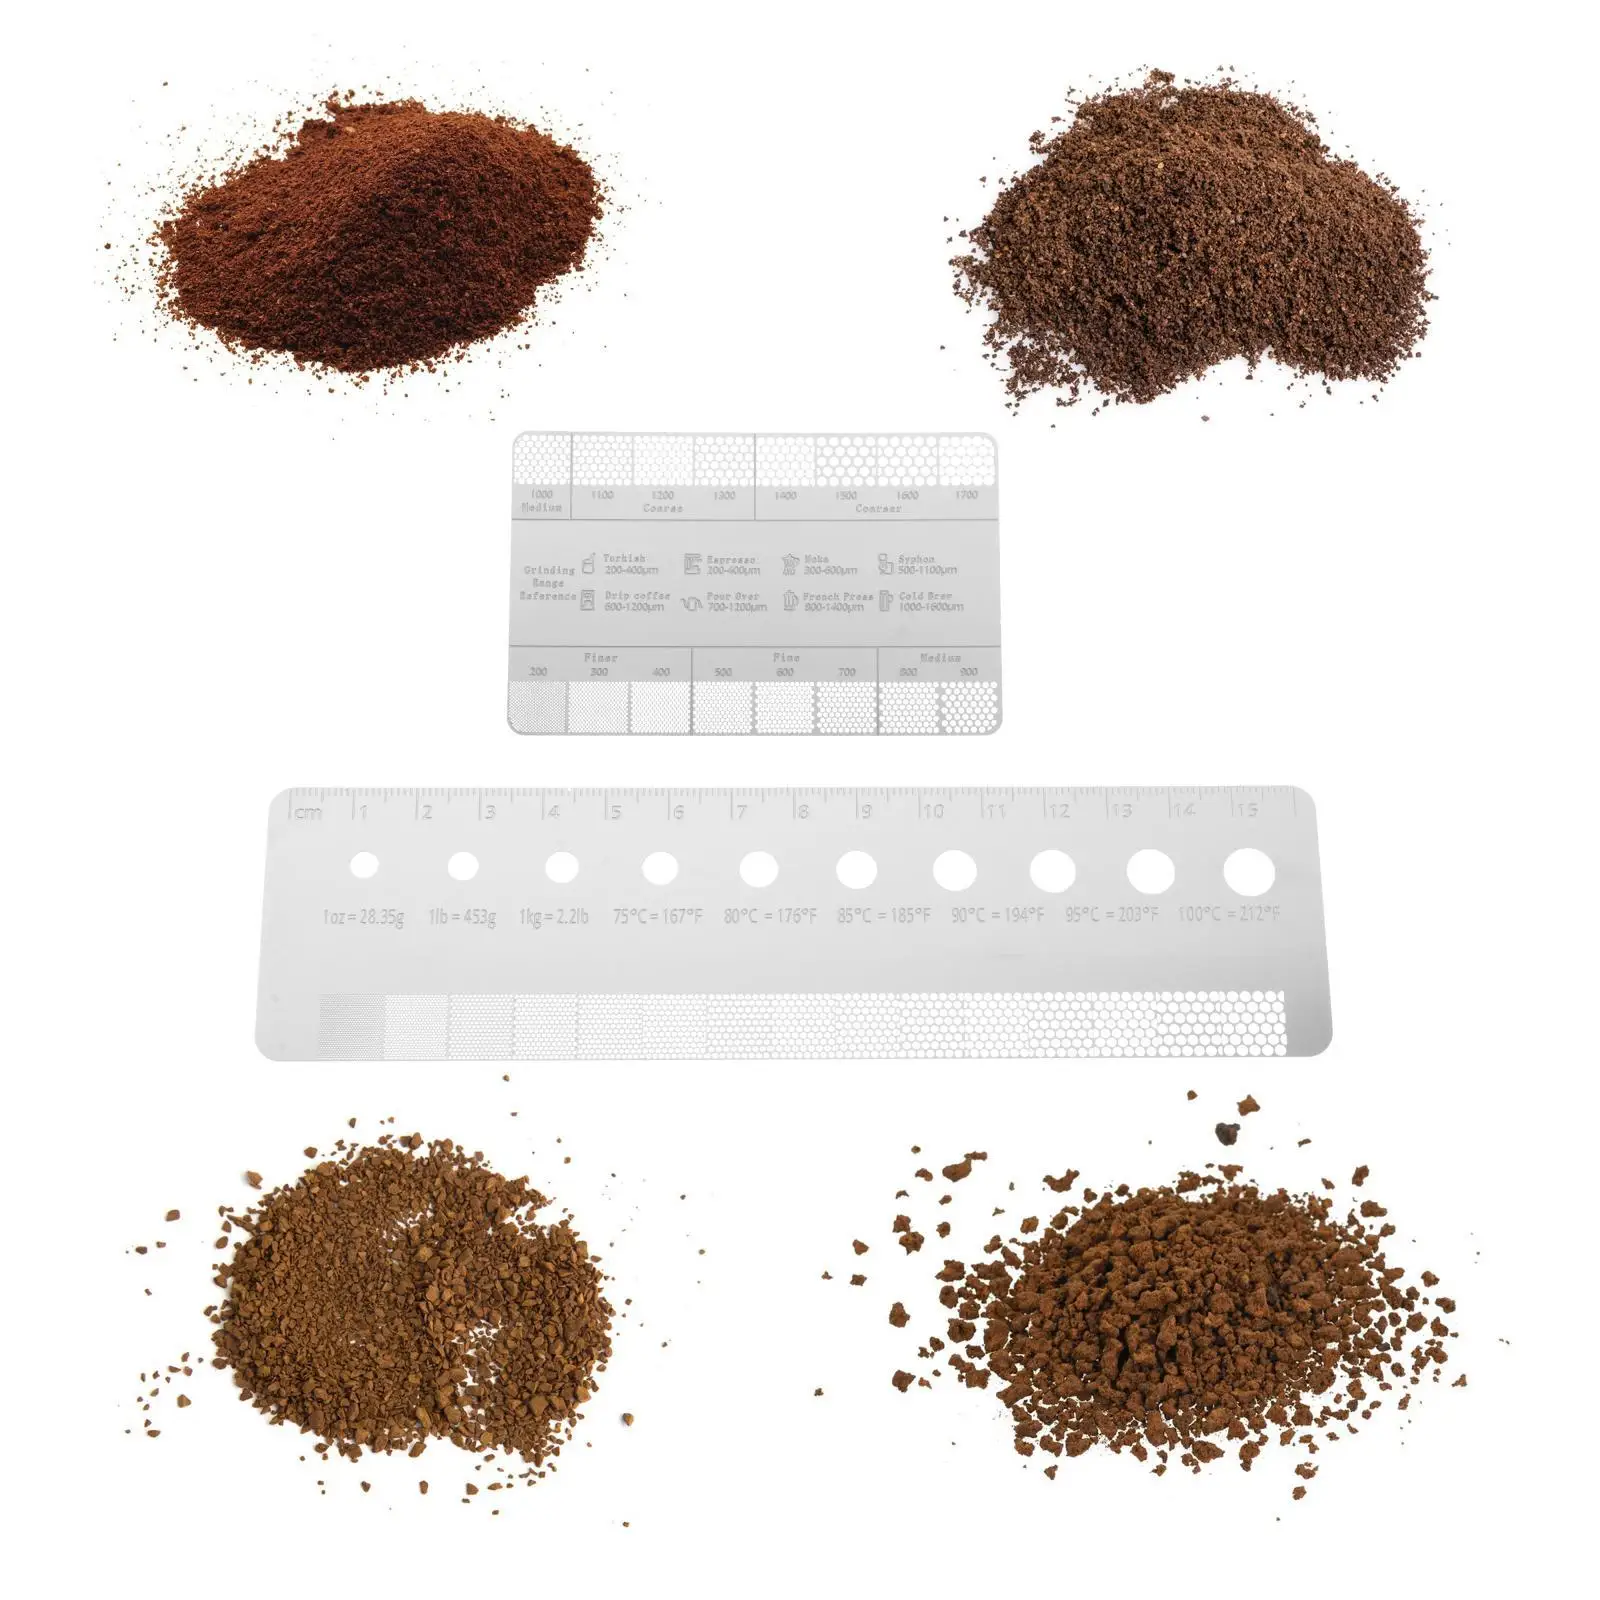 Ground coffee Sizes Measuring Precision Fine, Medium and Coarseness Green Bean Size for Coffee Making Supplies Bars Cafes